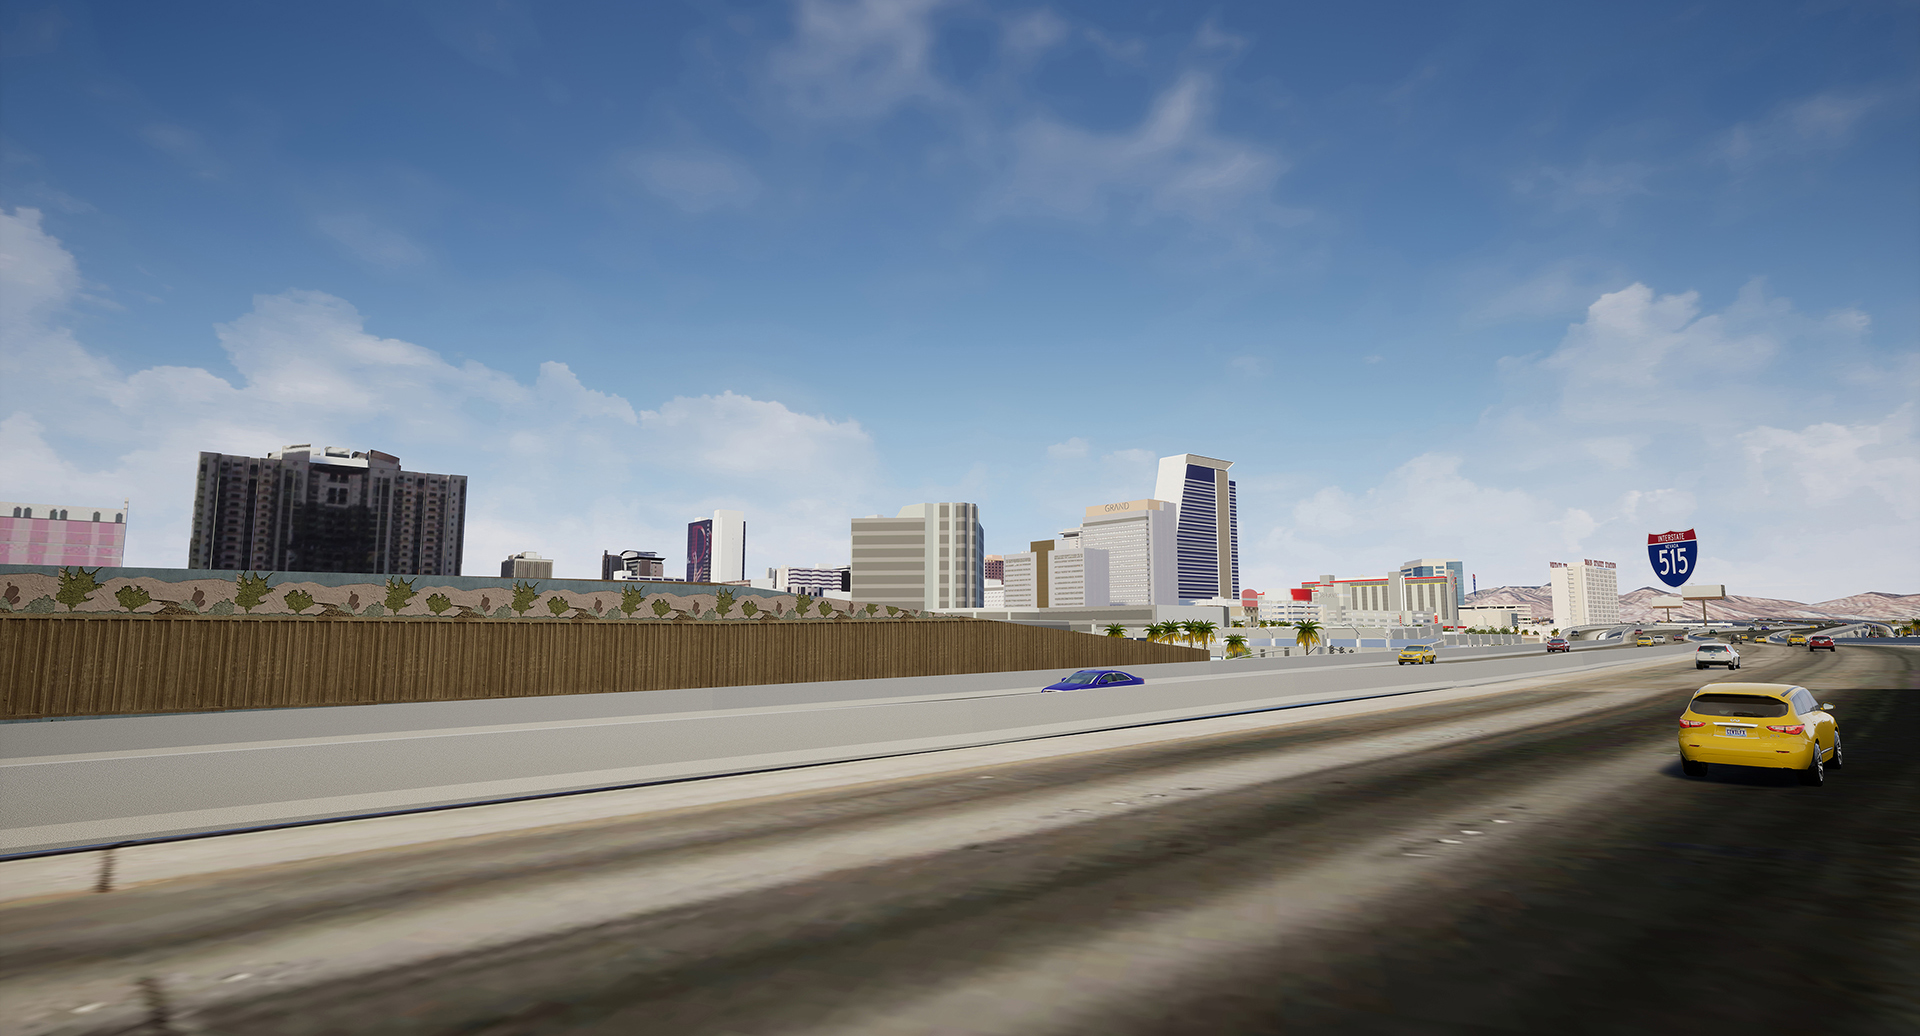 Driver View of Downtown from Proposed Design Alternatives